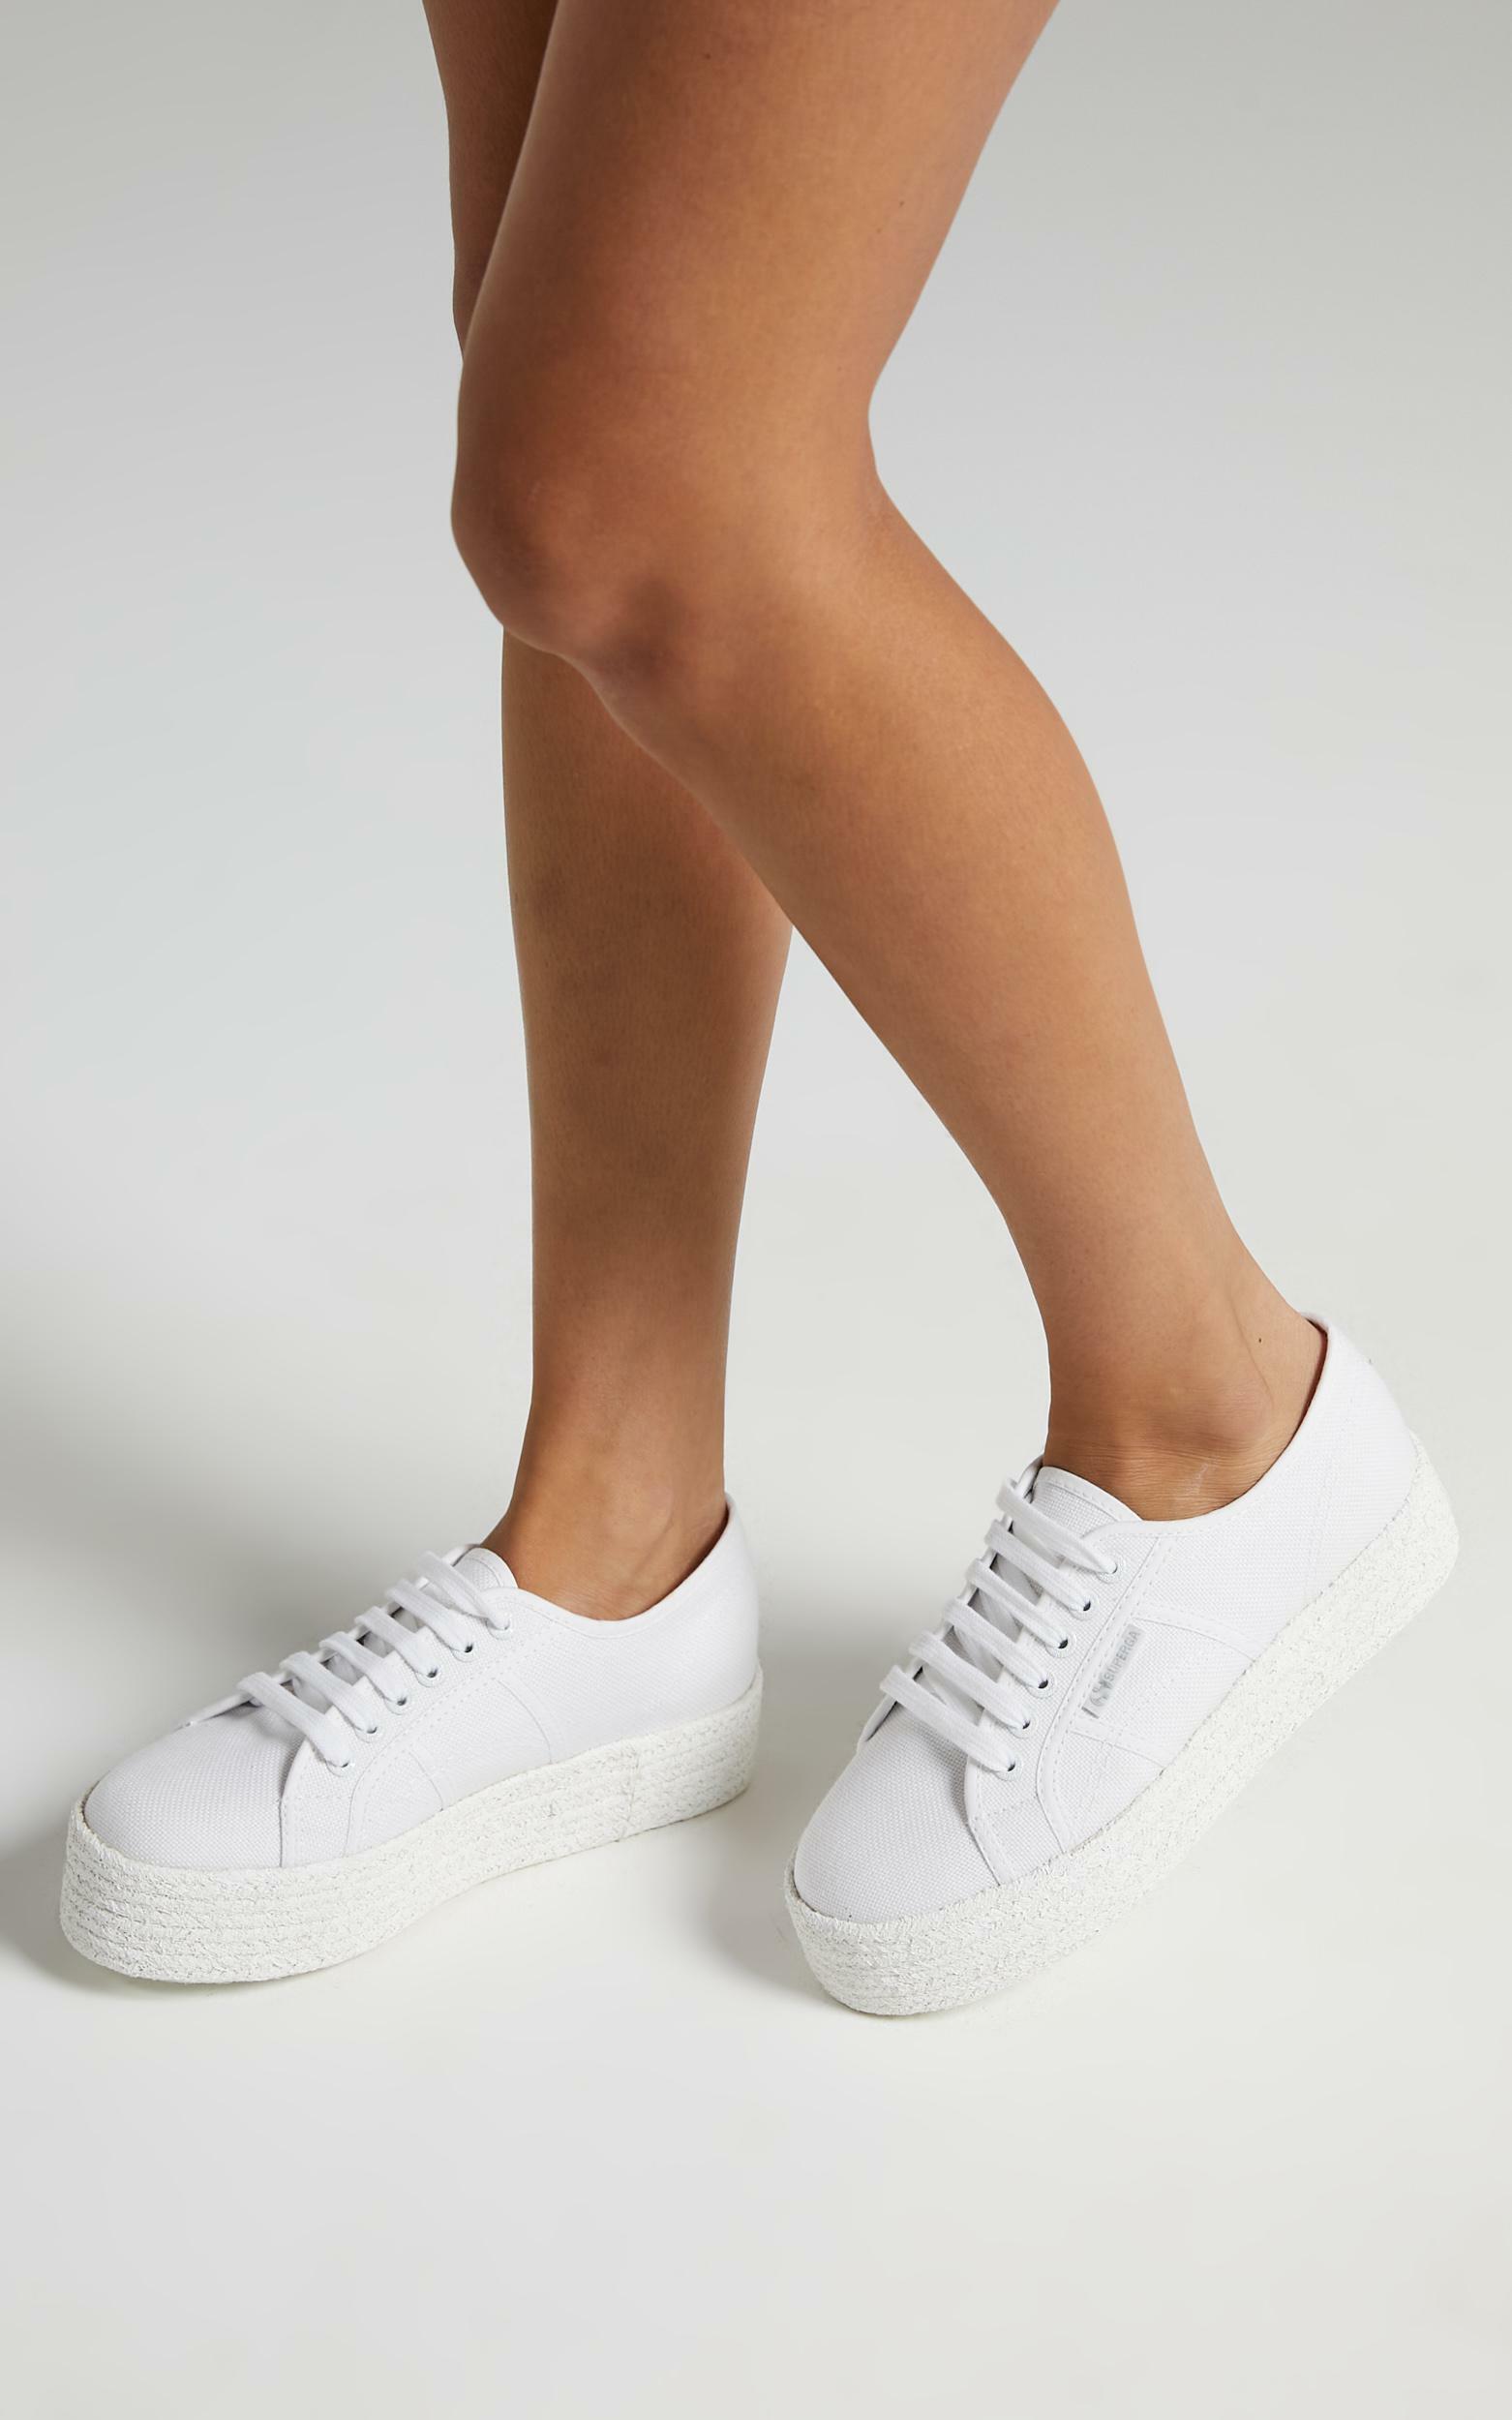 Superga - 2790 COT Color Rope in Total White - 05, WHT1, hi-res image number null